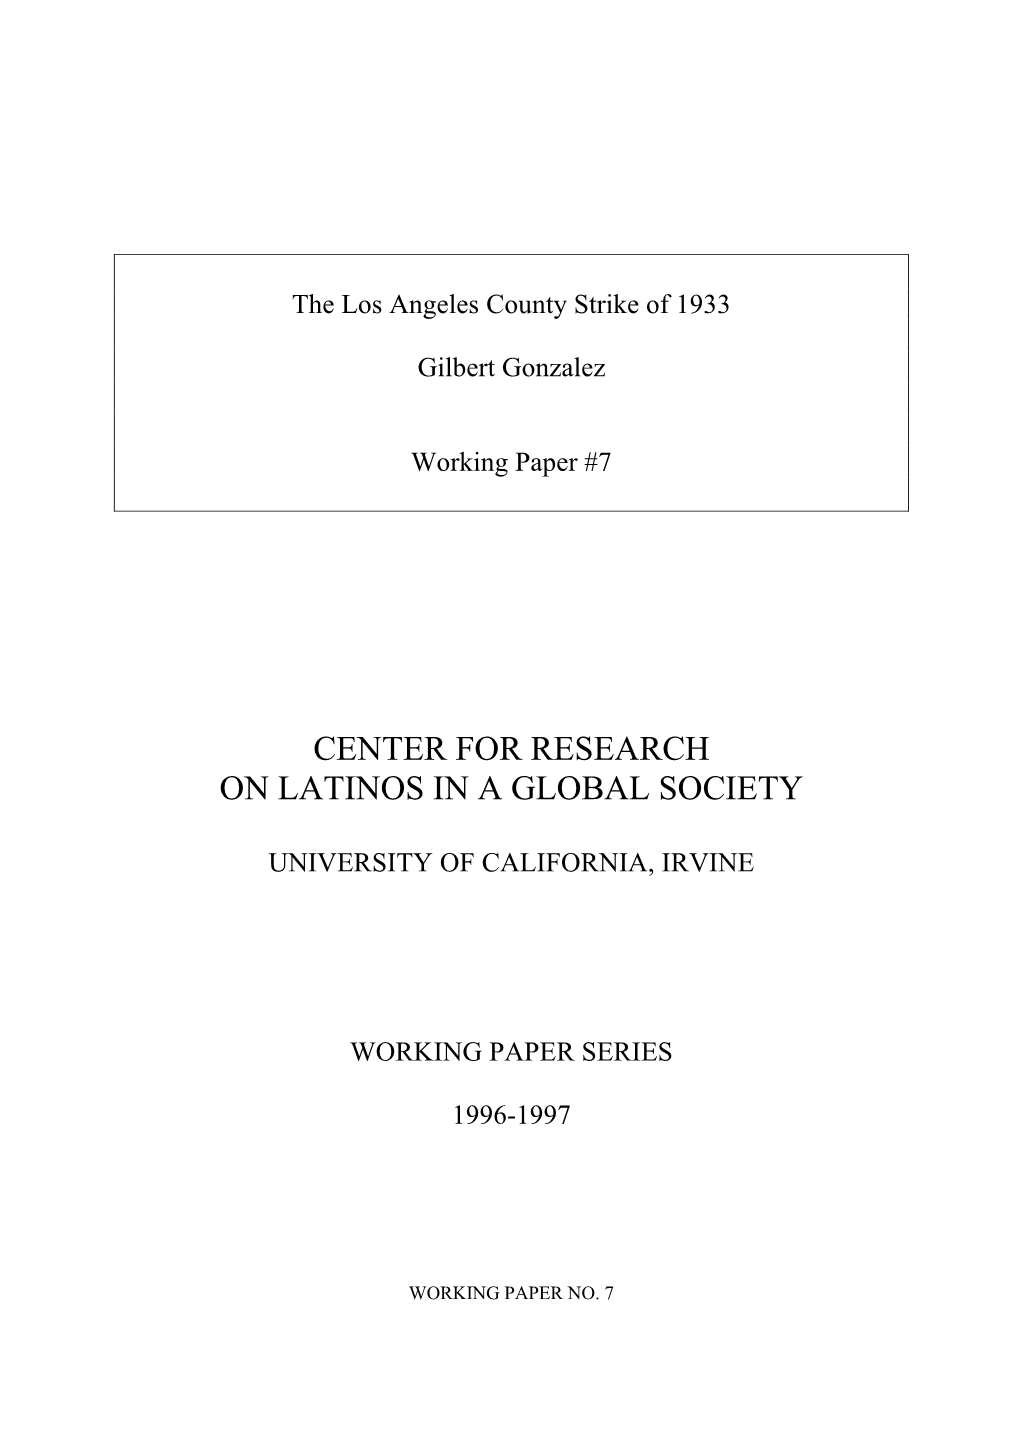 Center for Research on Latinos in a Global Society